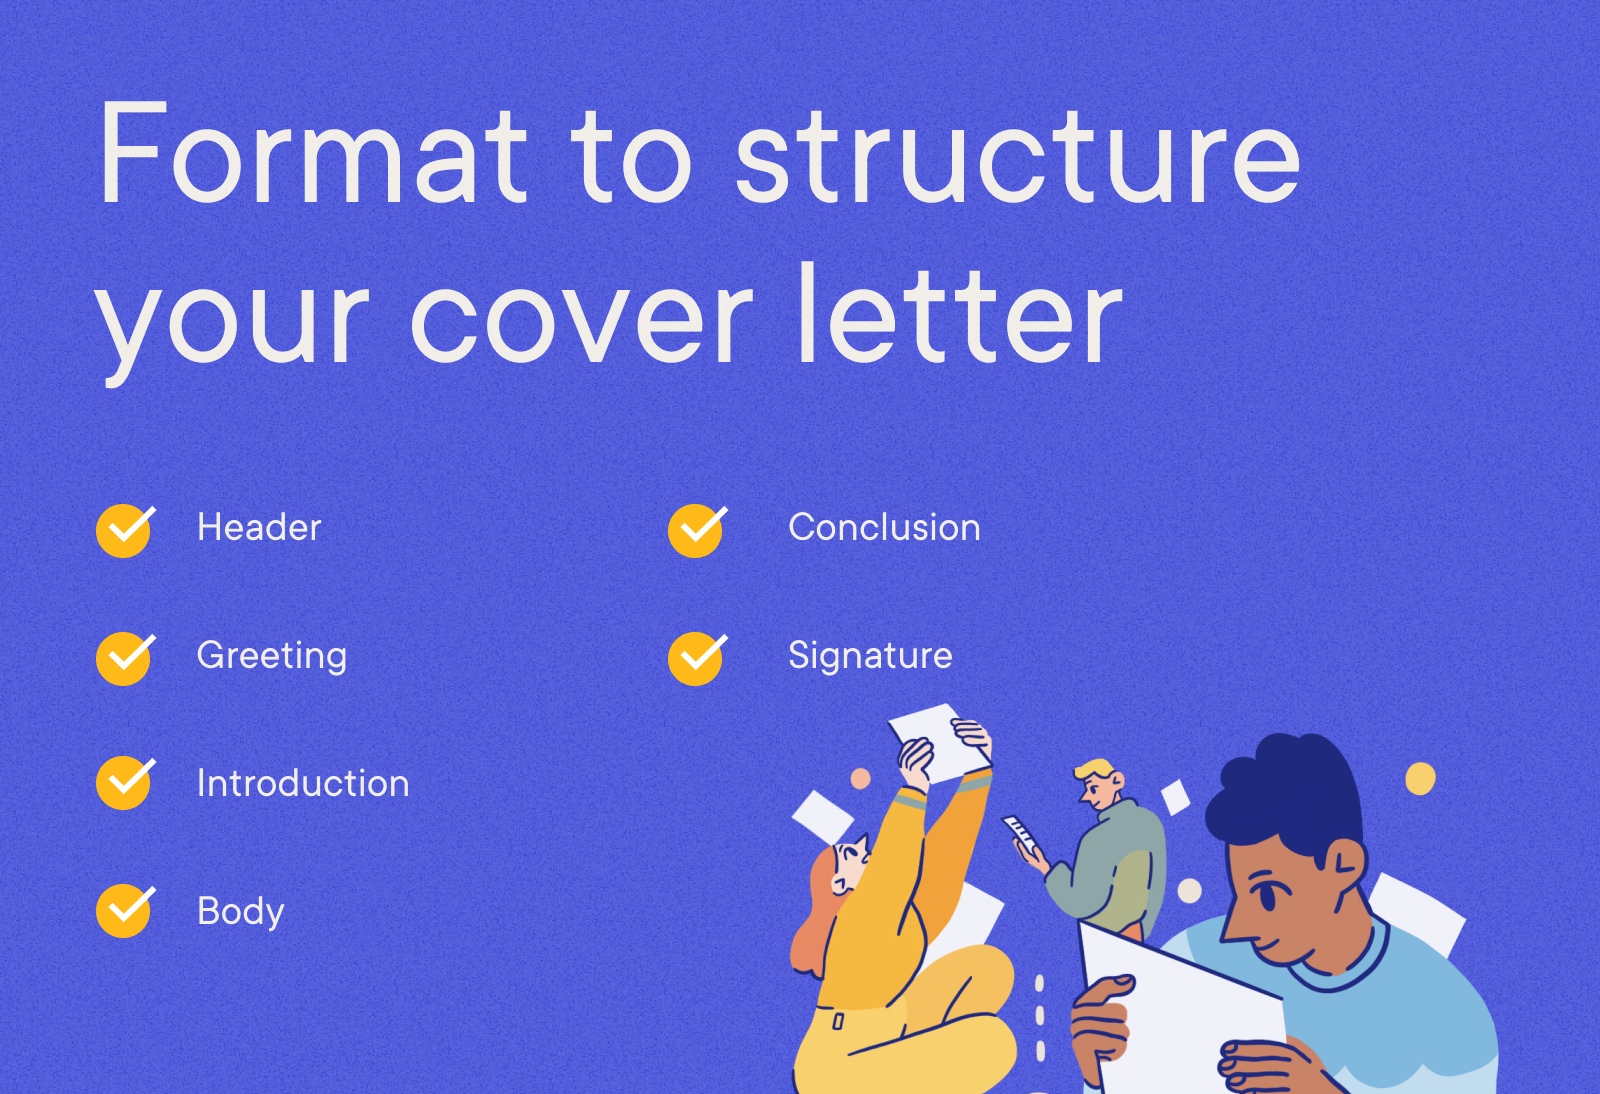 Software Developer - Format to structure your cover letter